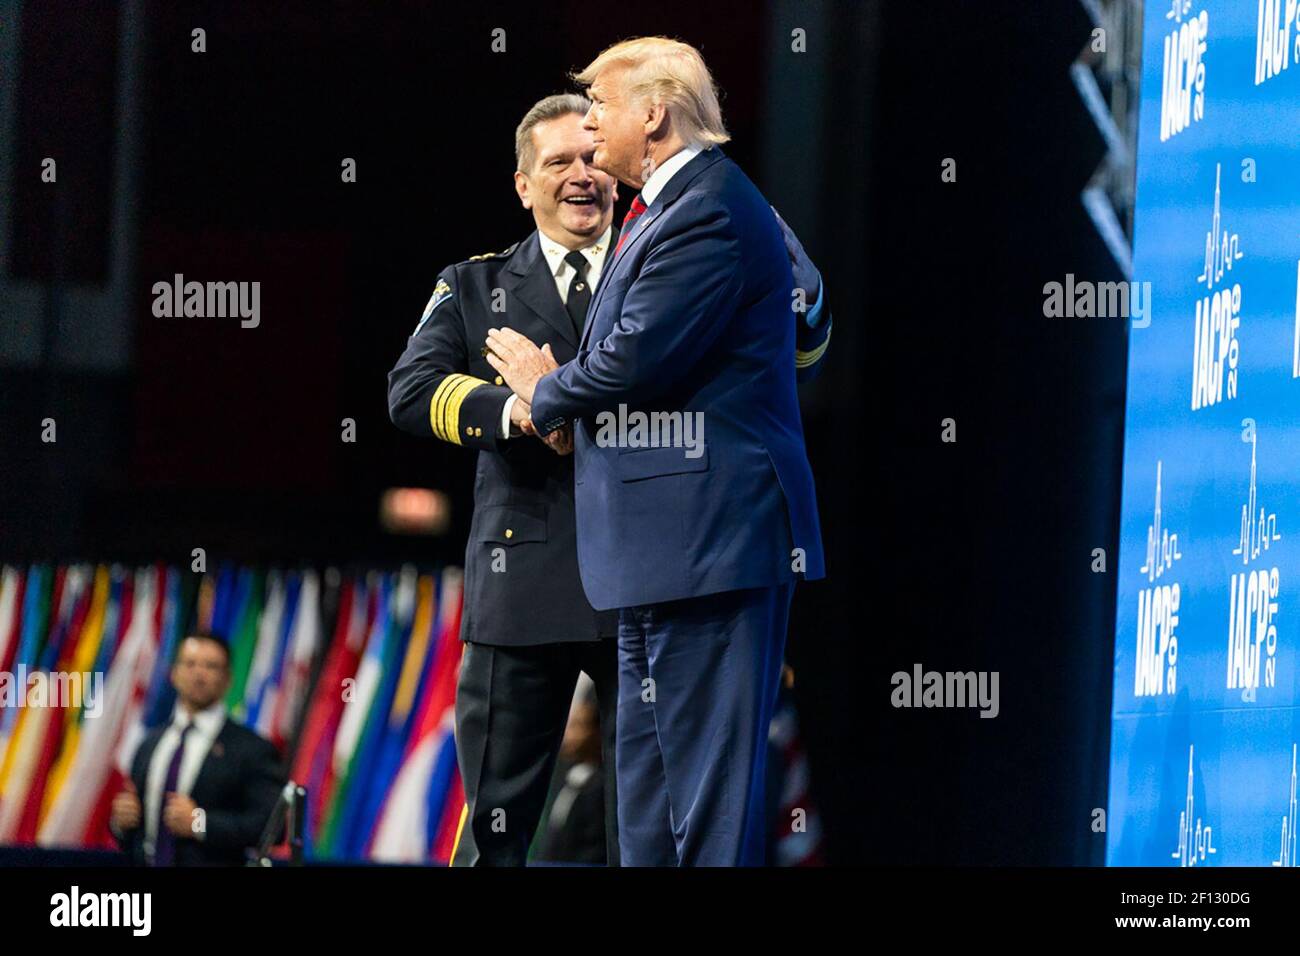 President Donald Trump is introduced by Chief Paul Cell at the International Association of Chiefs of Police Annual Conference and Exposition Monday Oct. 28 2019 at the McCormick Place Convention Center Chicago in Chicago. Stock Photo